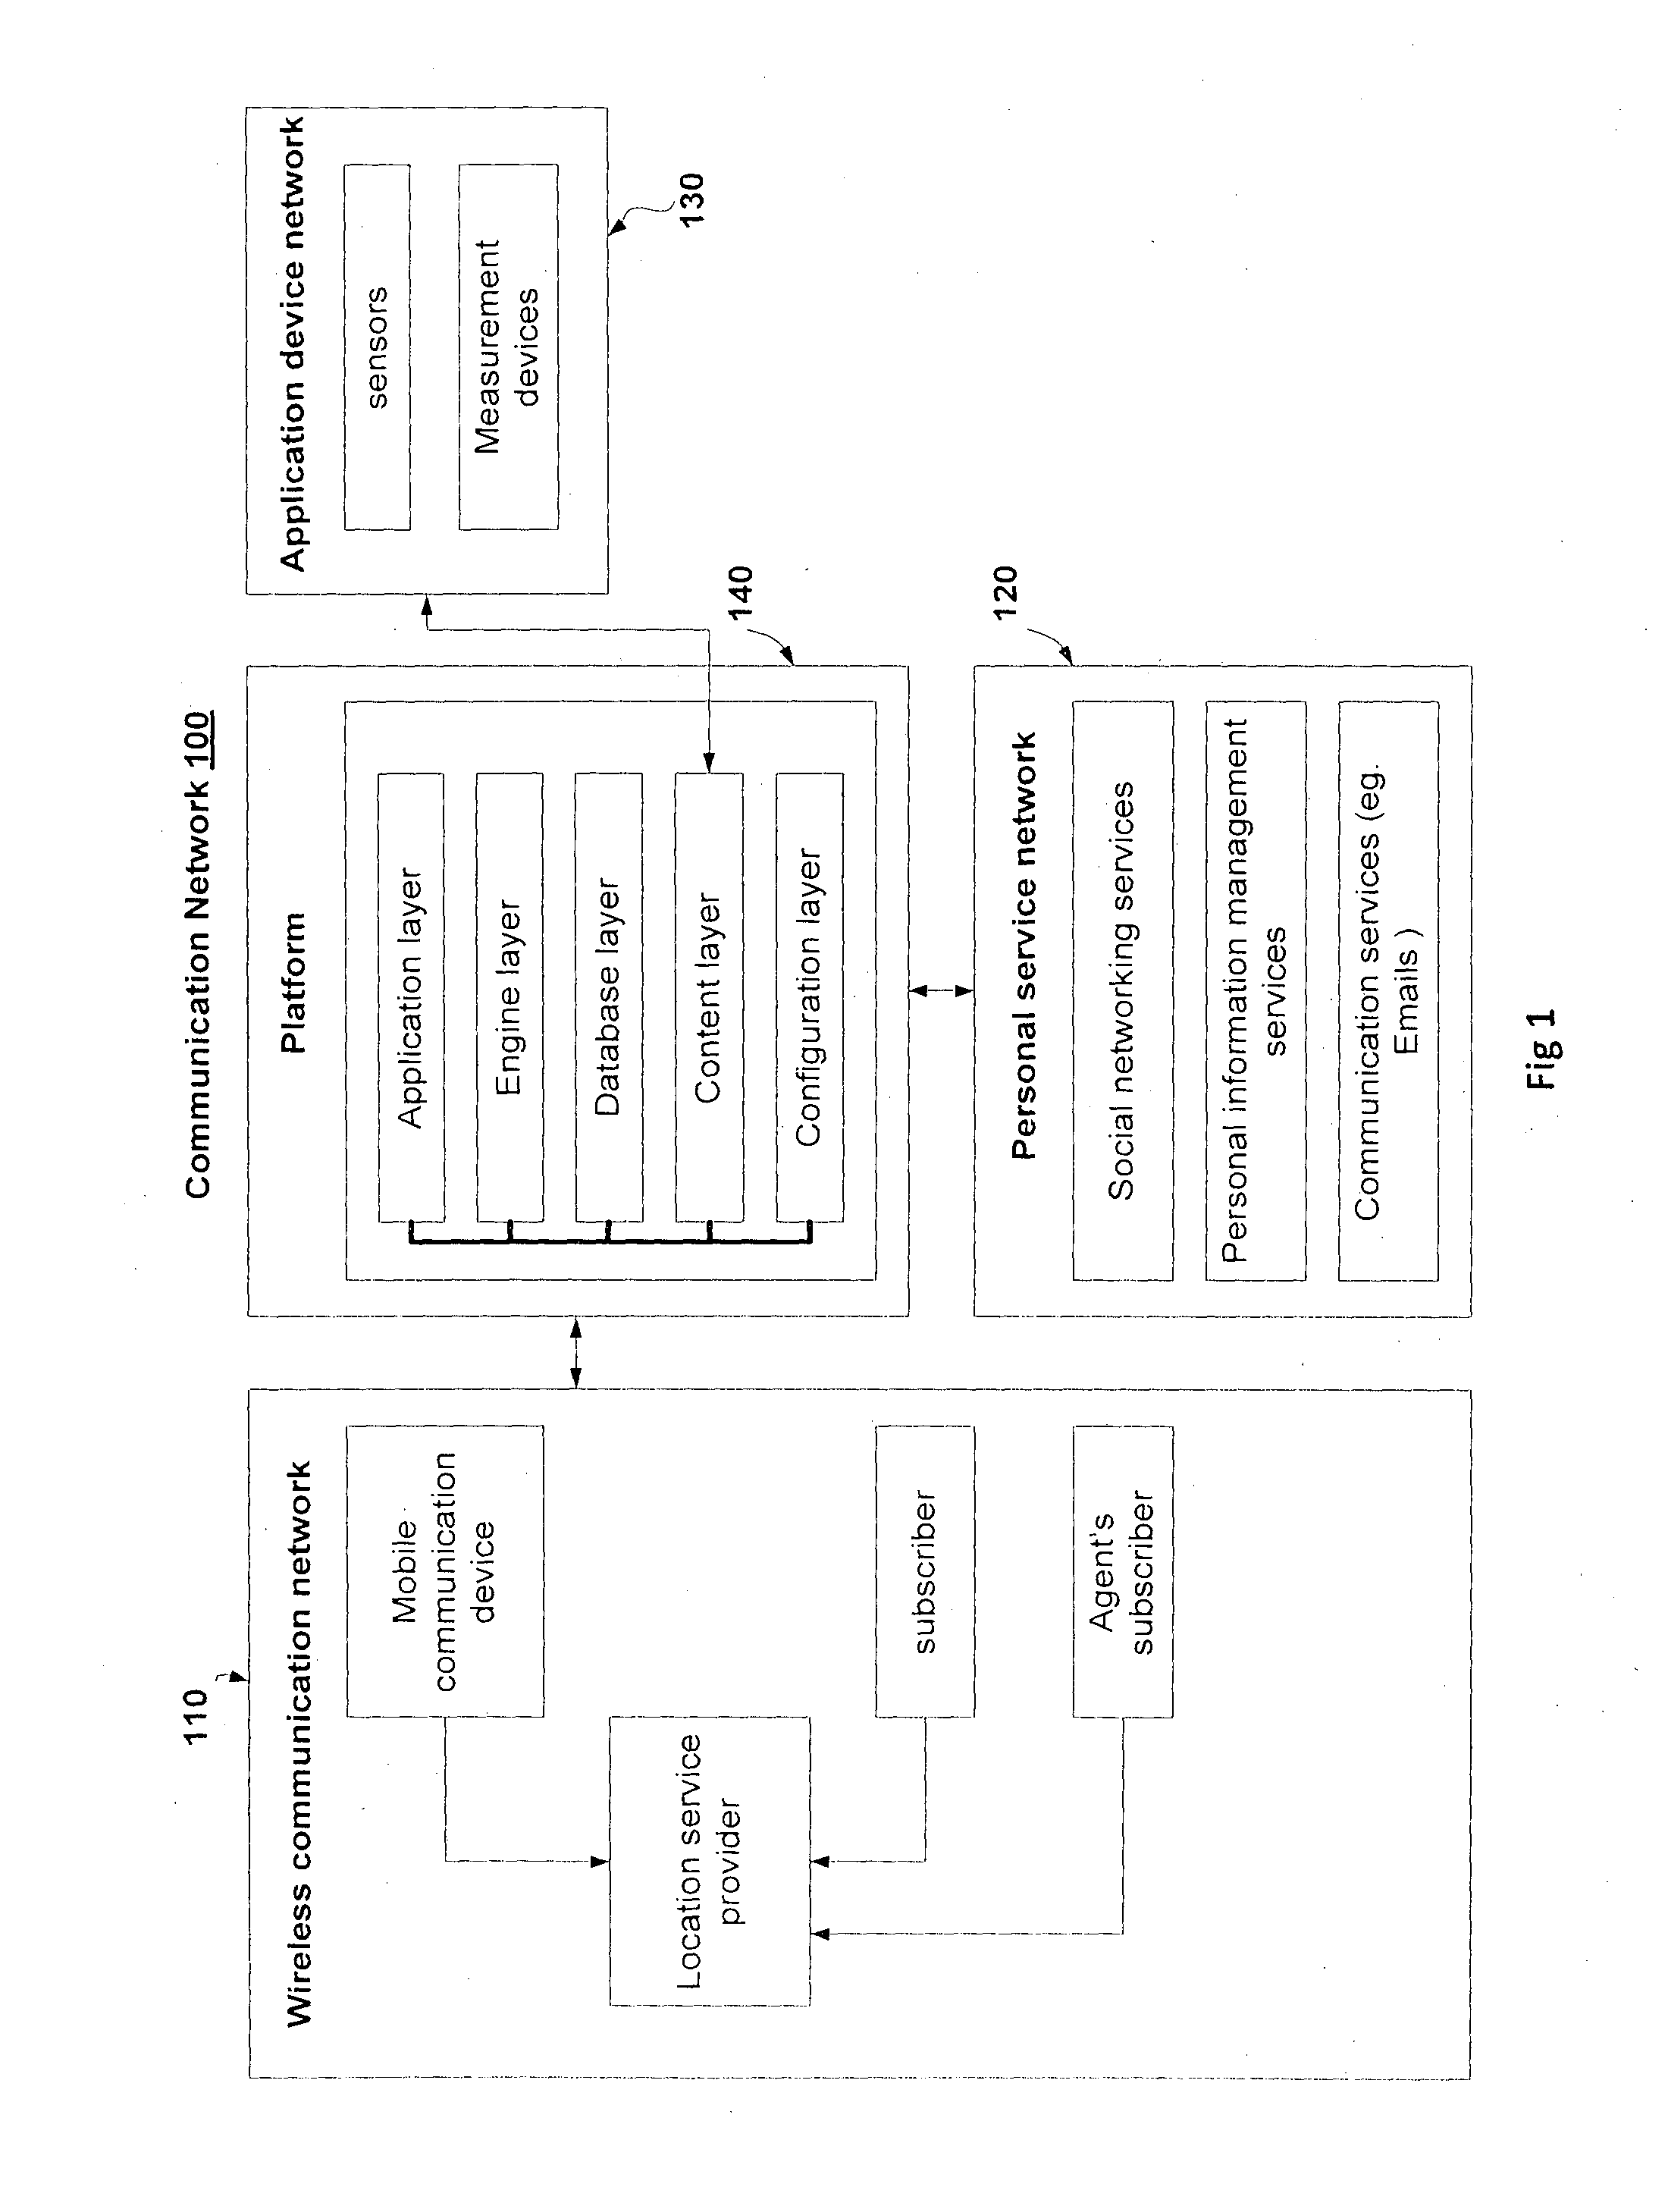 System and method for multi party characteristics and requirements matching and timing synchronization